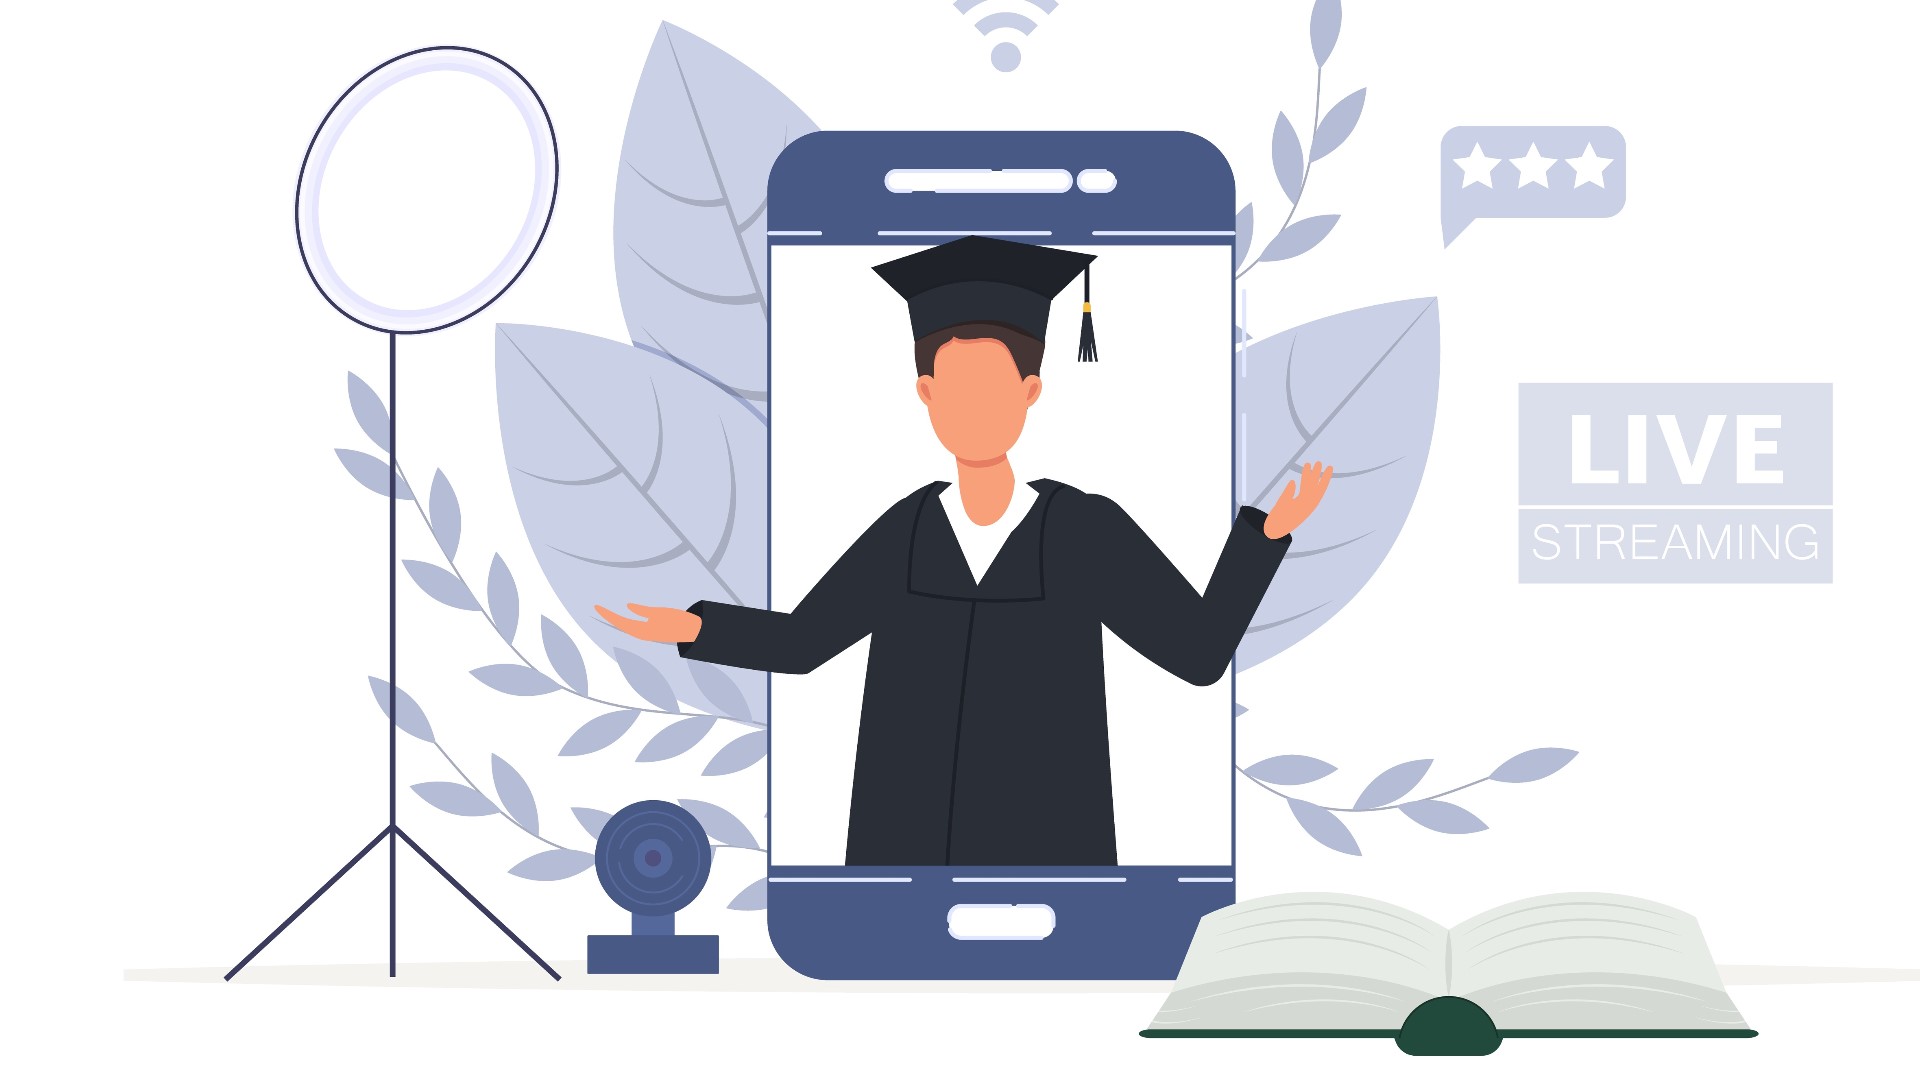 Live streaming graduations and more have become wildly popular over the past year, keeping some businesses very busy.